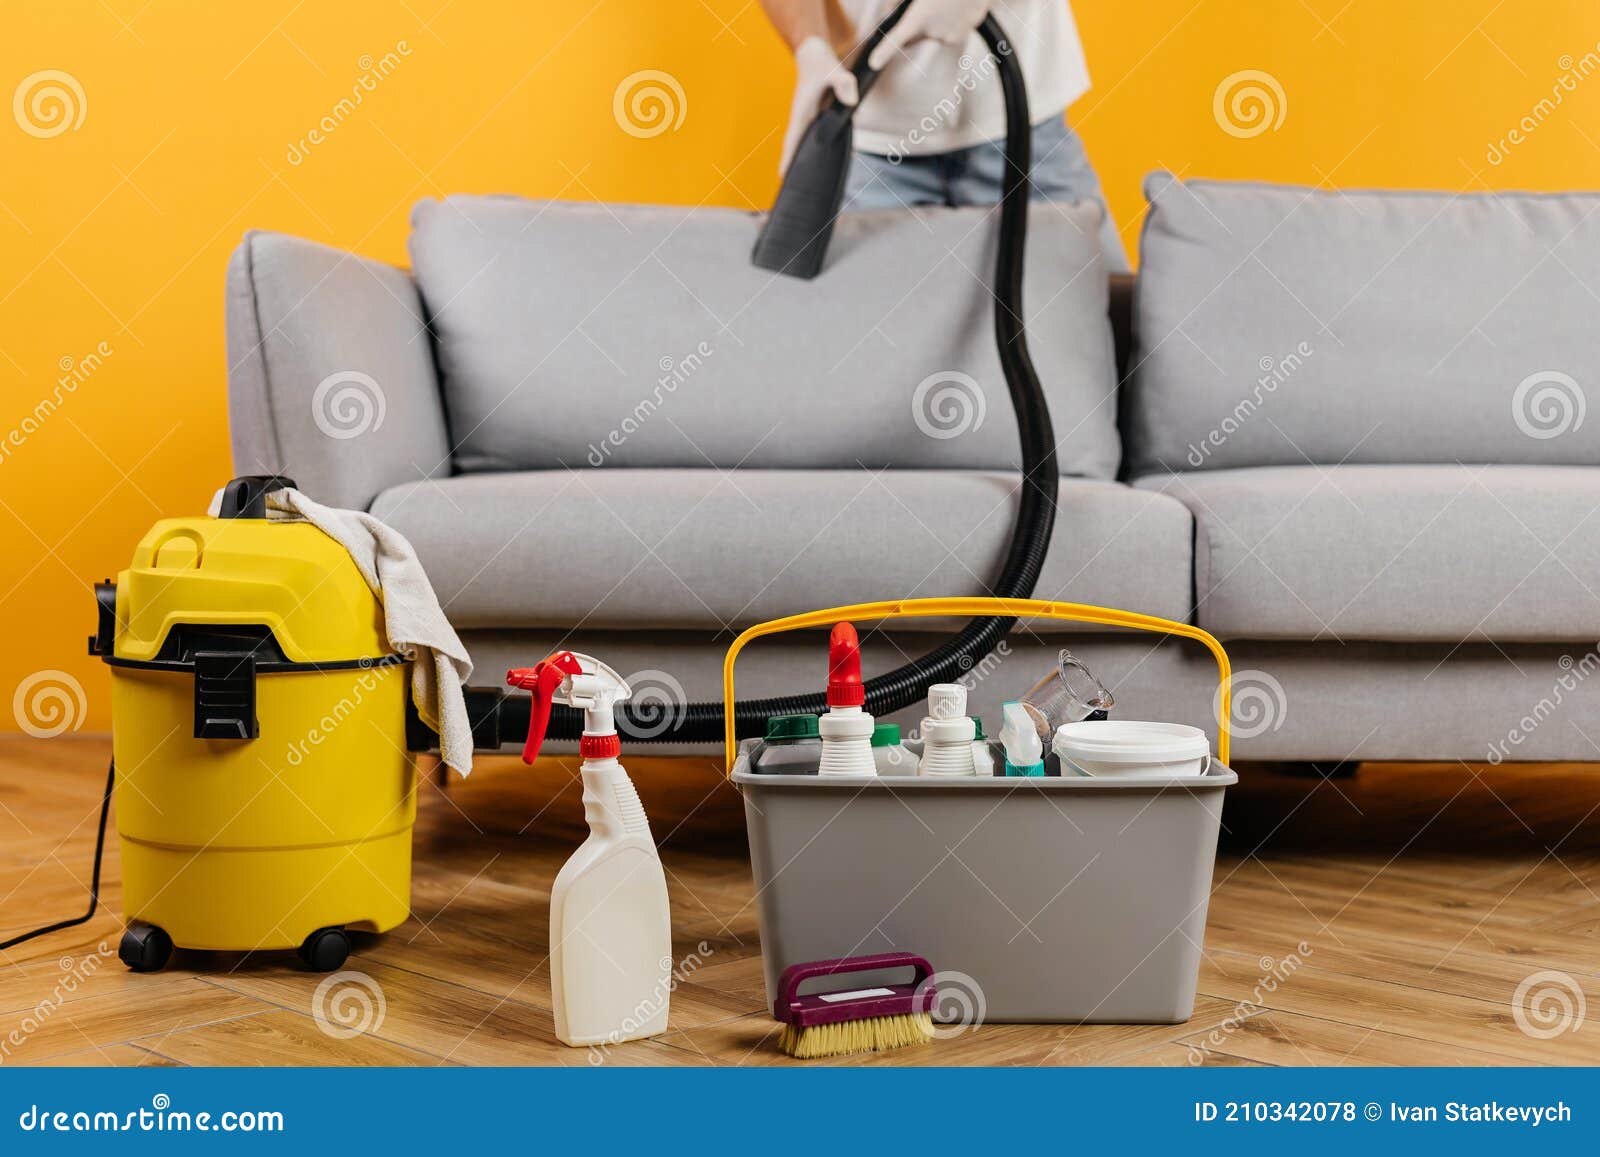 Rusteloosheid Kangoeroe aanpassen Cleaning Service with Professional Equipment during Work , Sofa Dry Cleaning.  Man in Uniform, Overalls and Rubber Gloves Stock Photo - Image of washing,  floor: 210342078